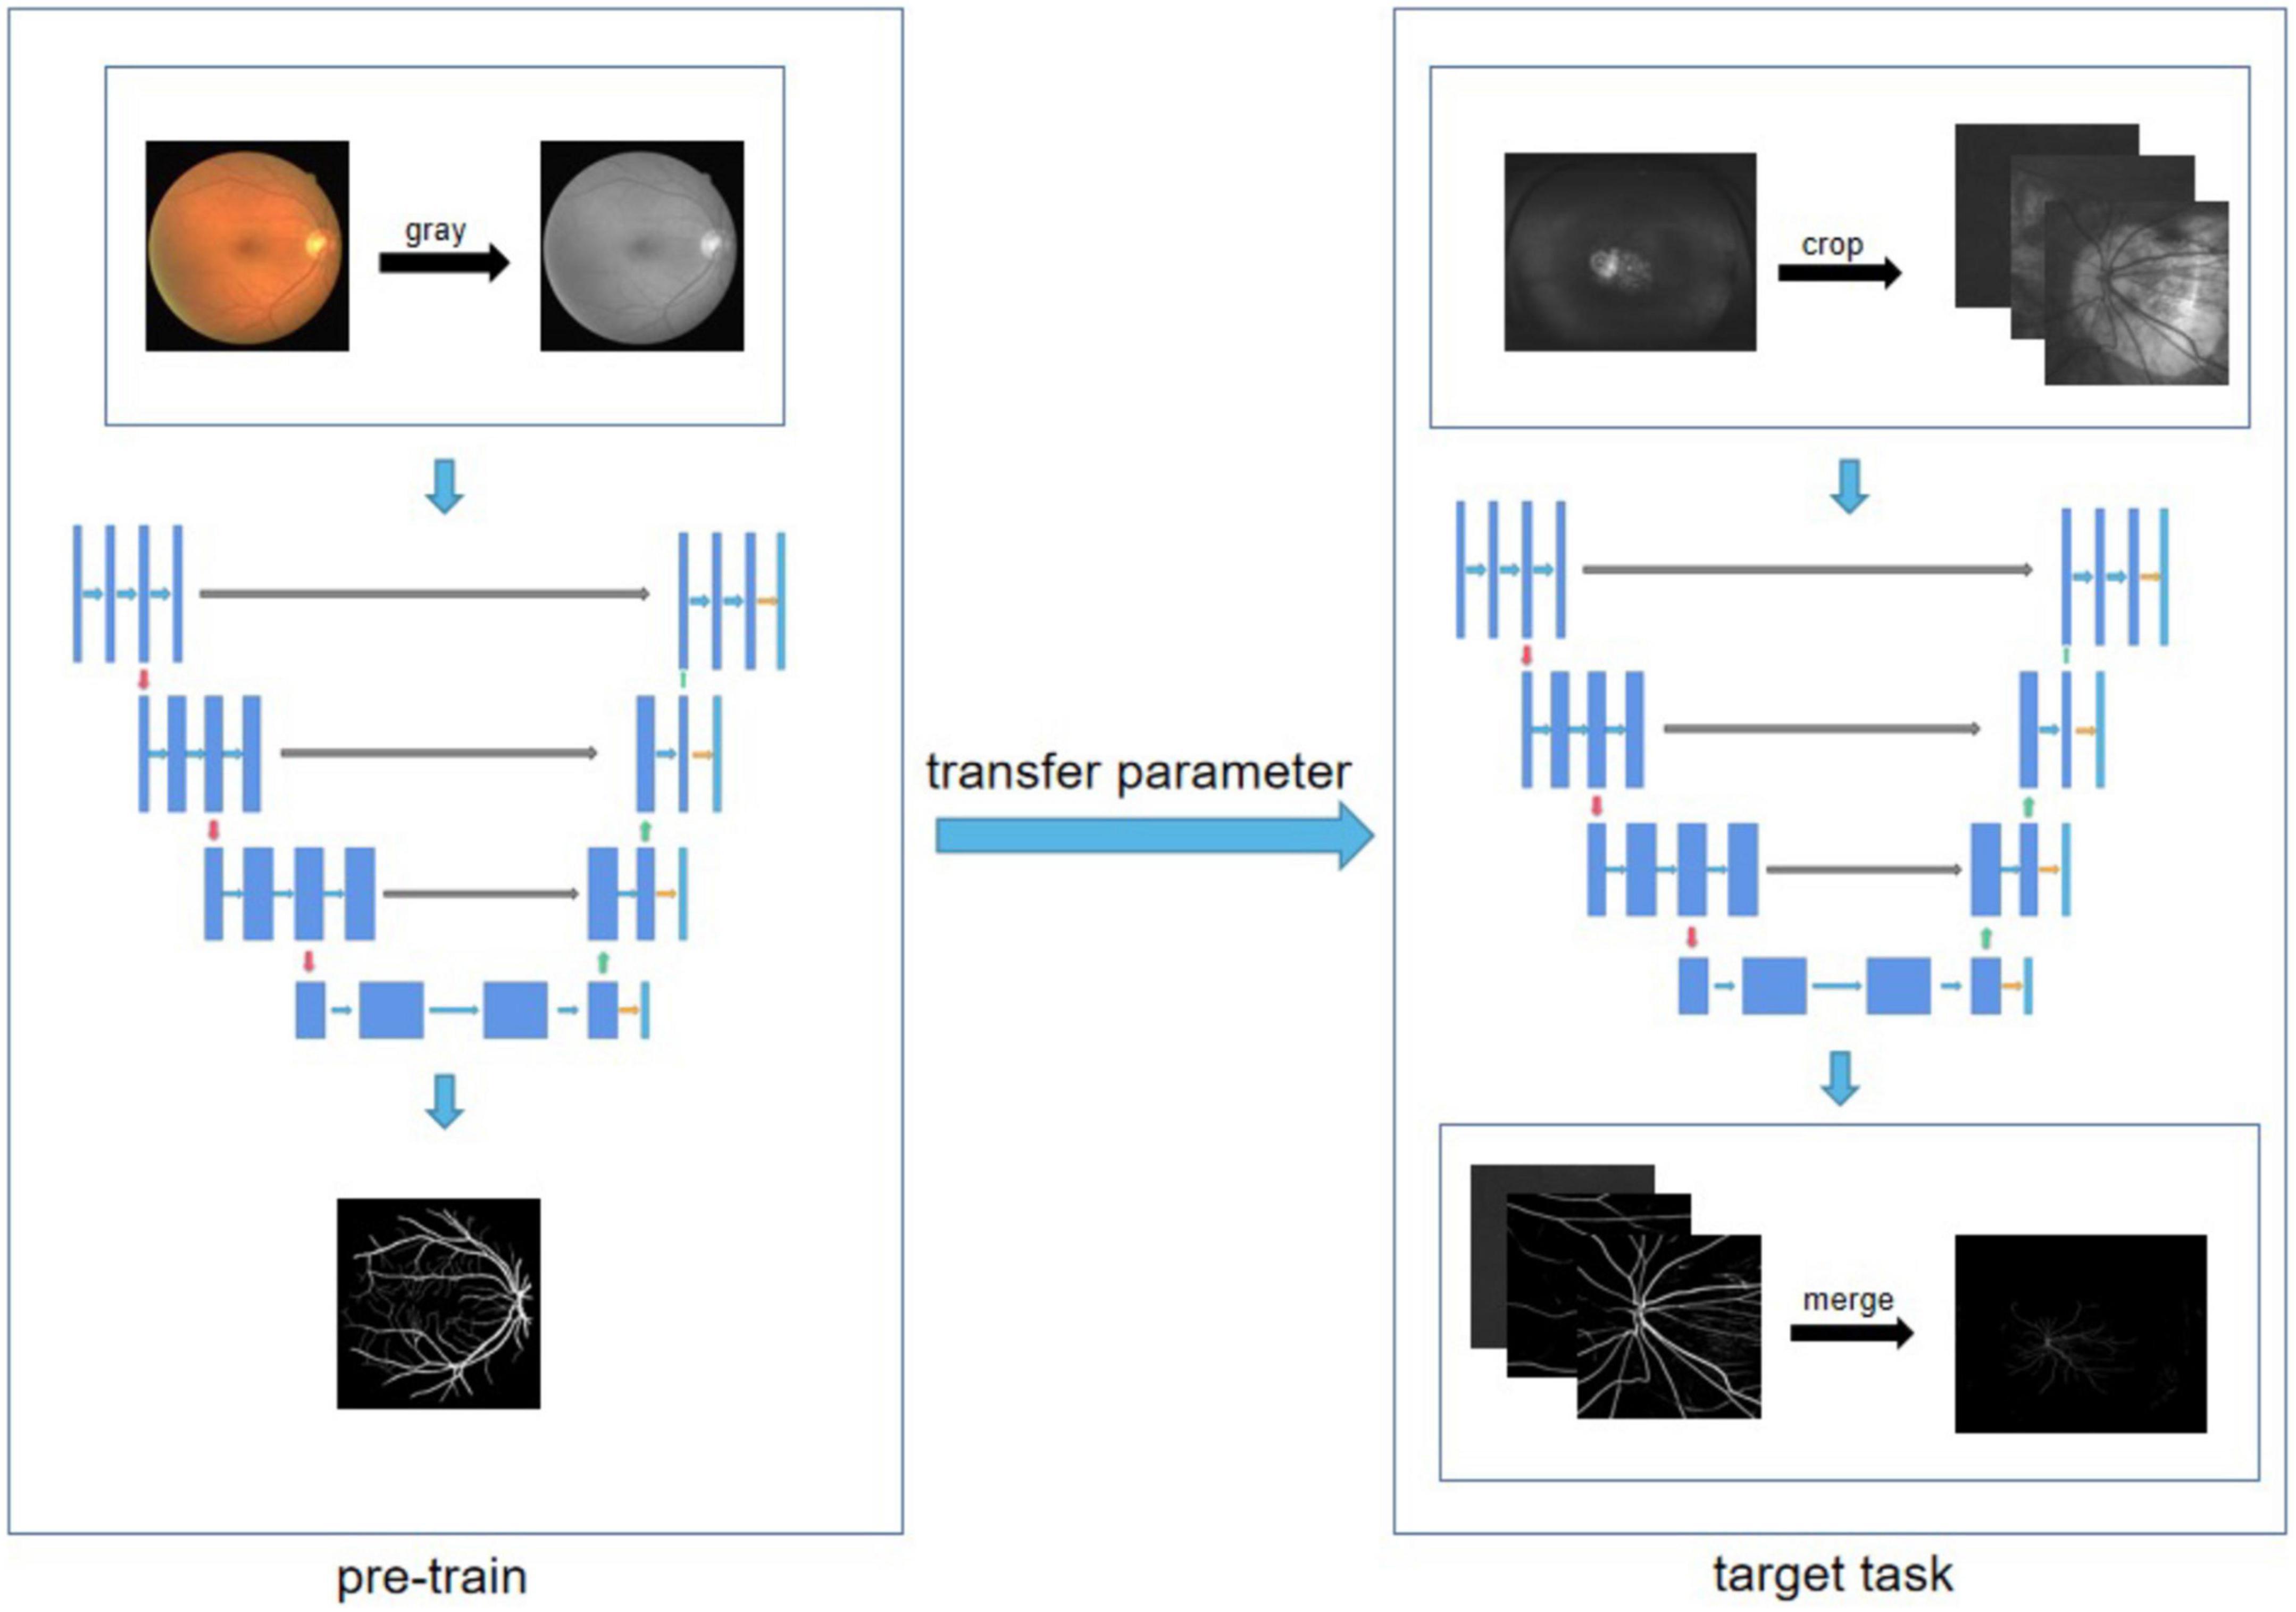 Morphological characteristics of retinal vessels in eyes with high myopia: Ultra-wide field images analyzed by artificial intelligence using a transfer learning system